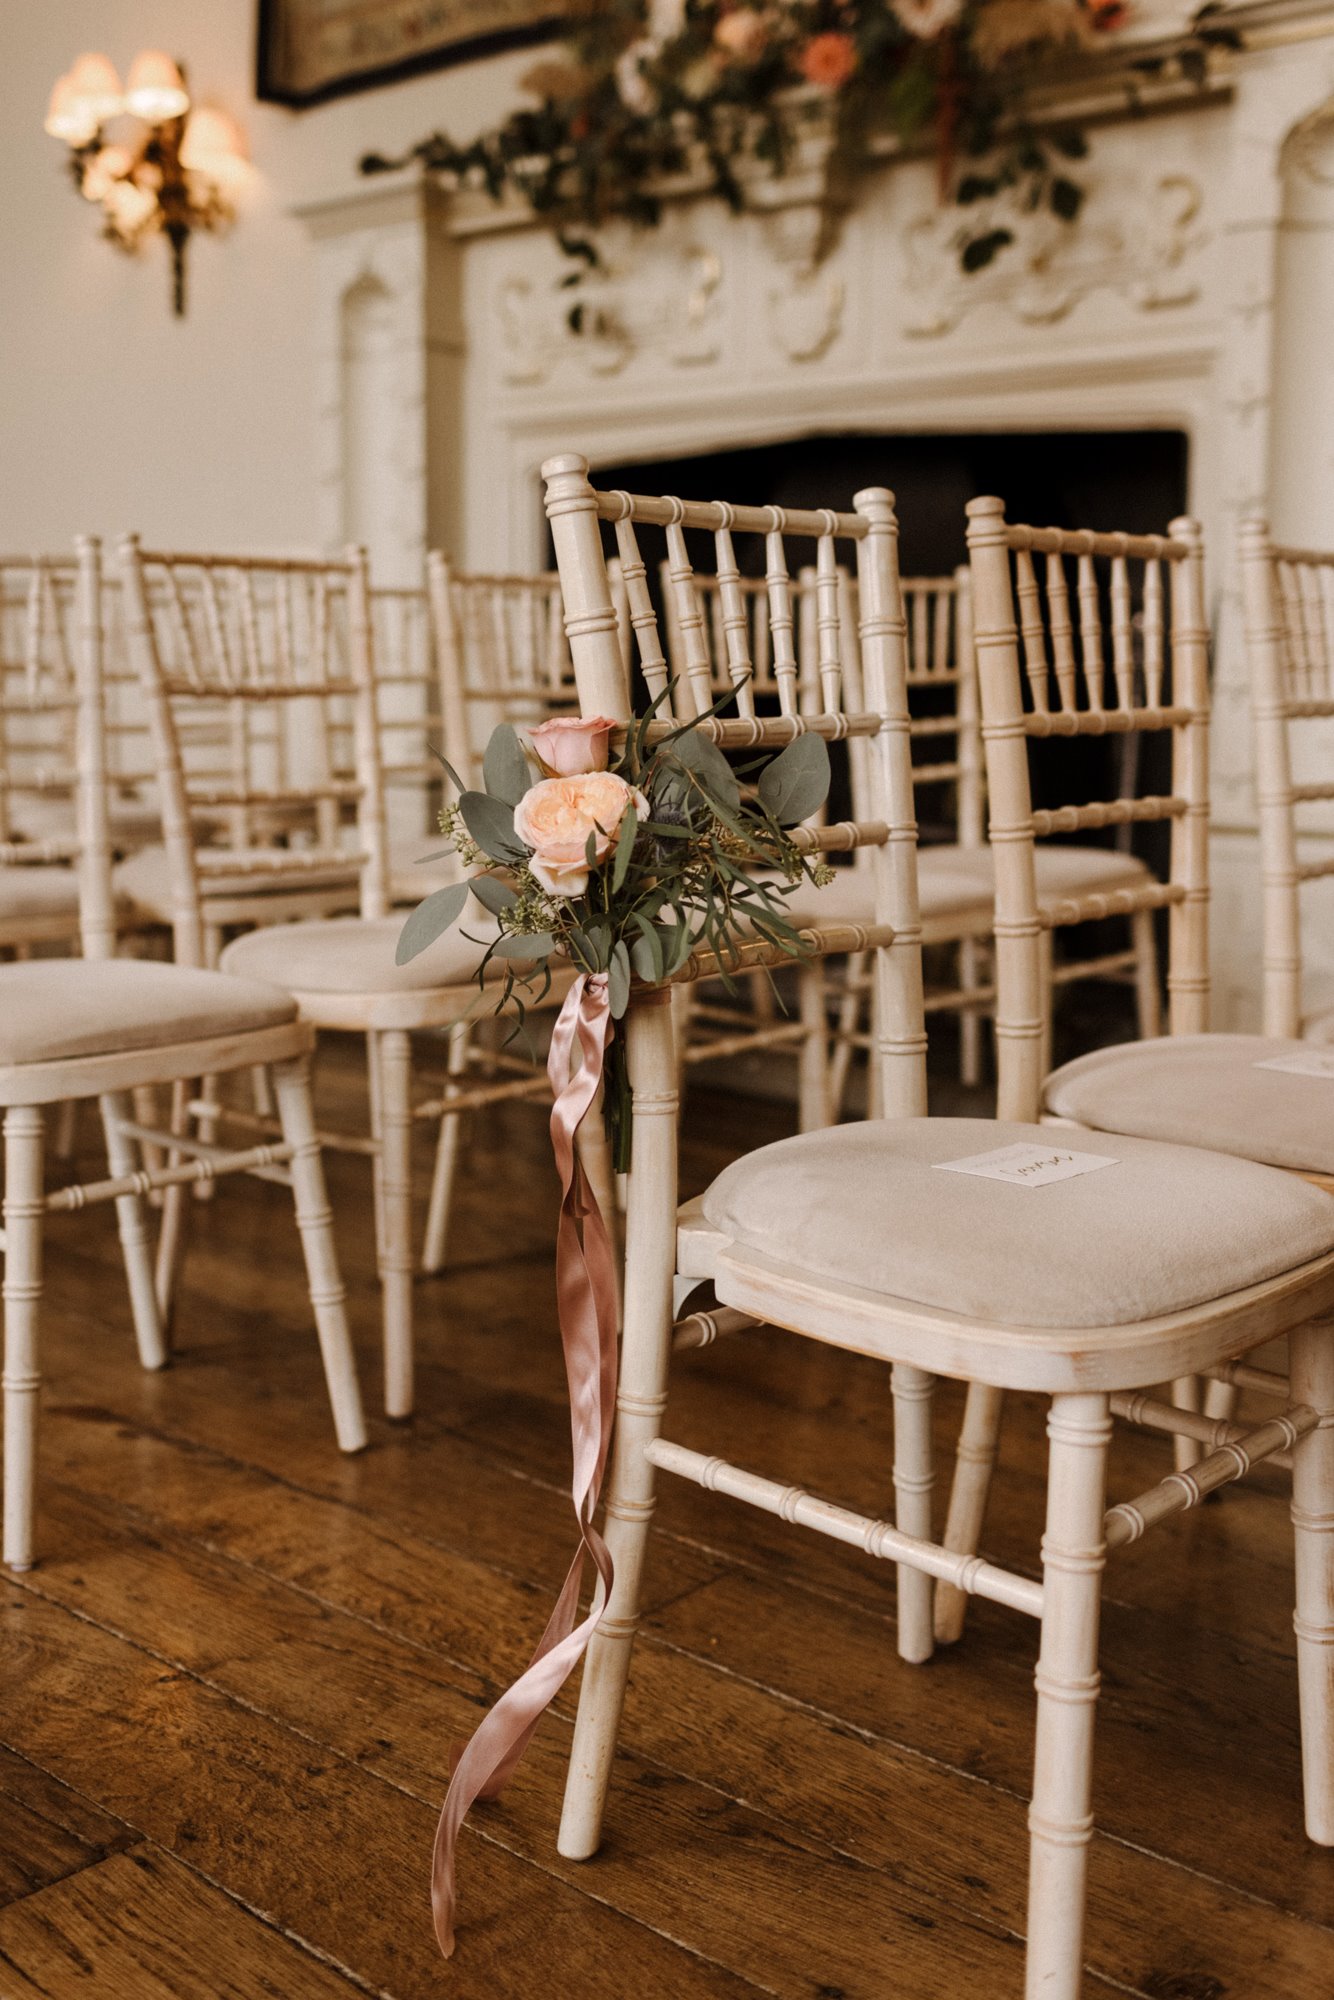 wedding ceremony decor on aisle chairs at stately home